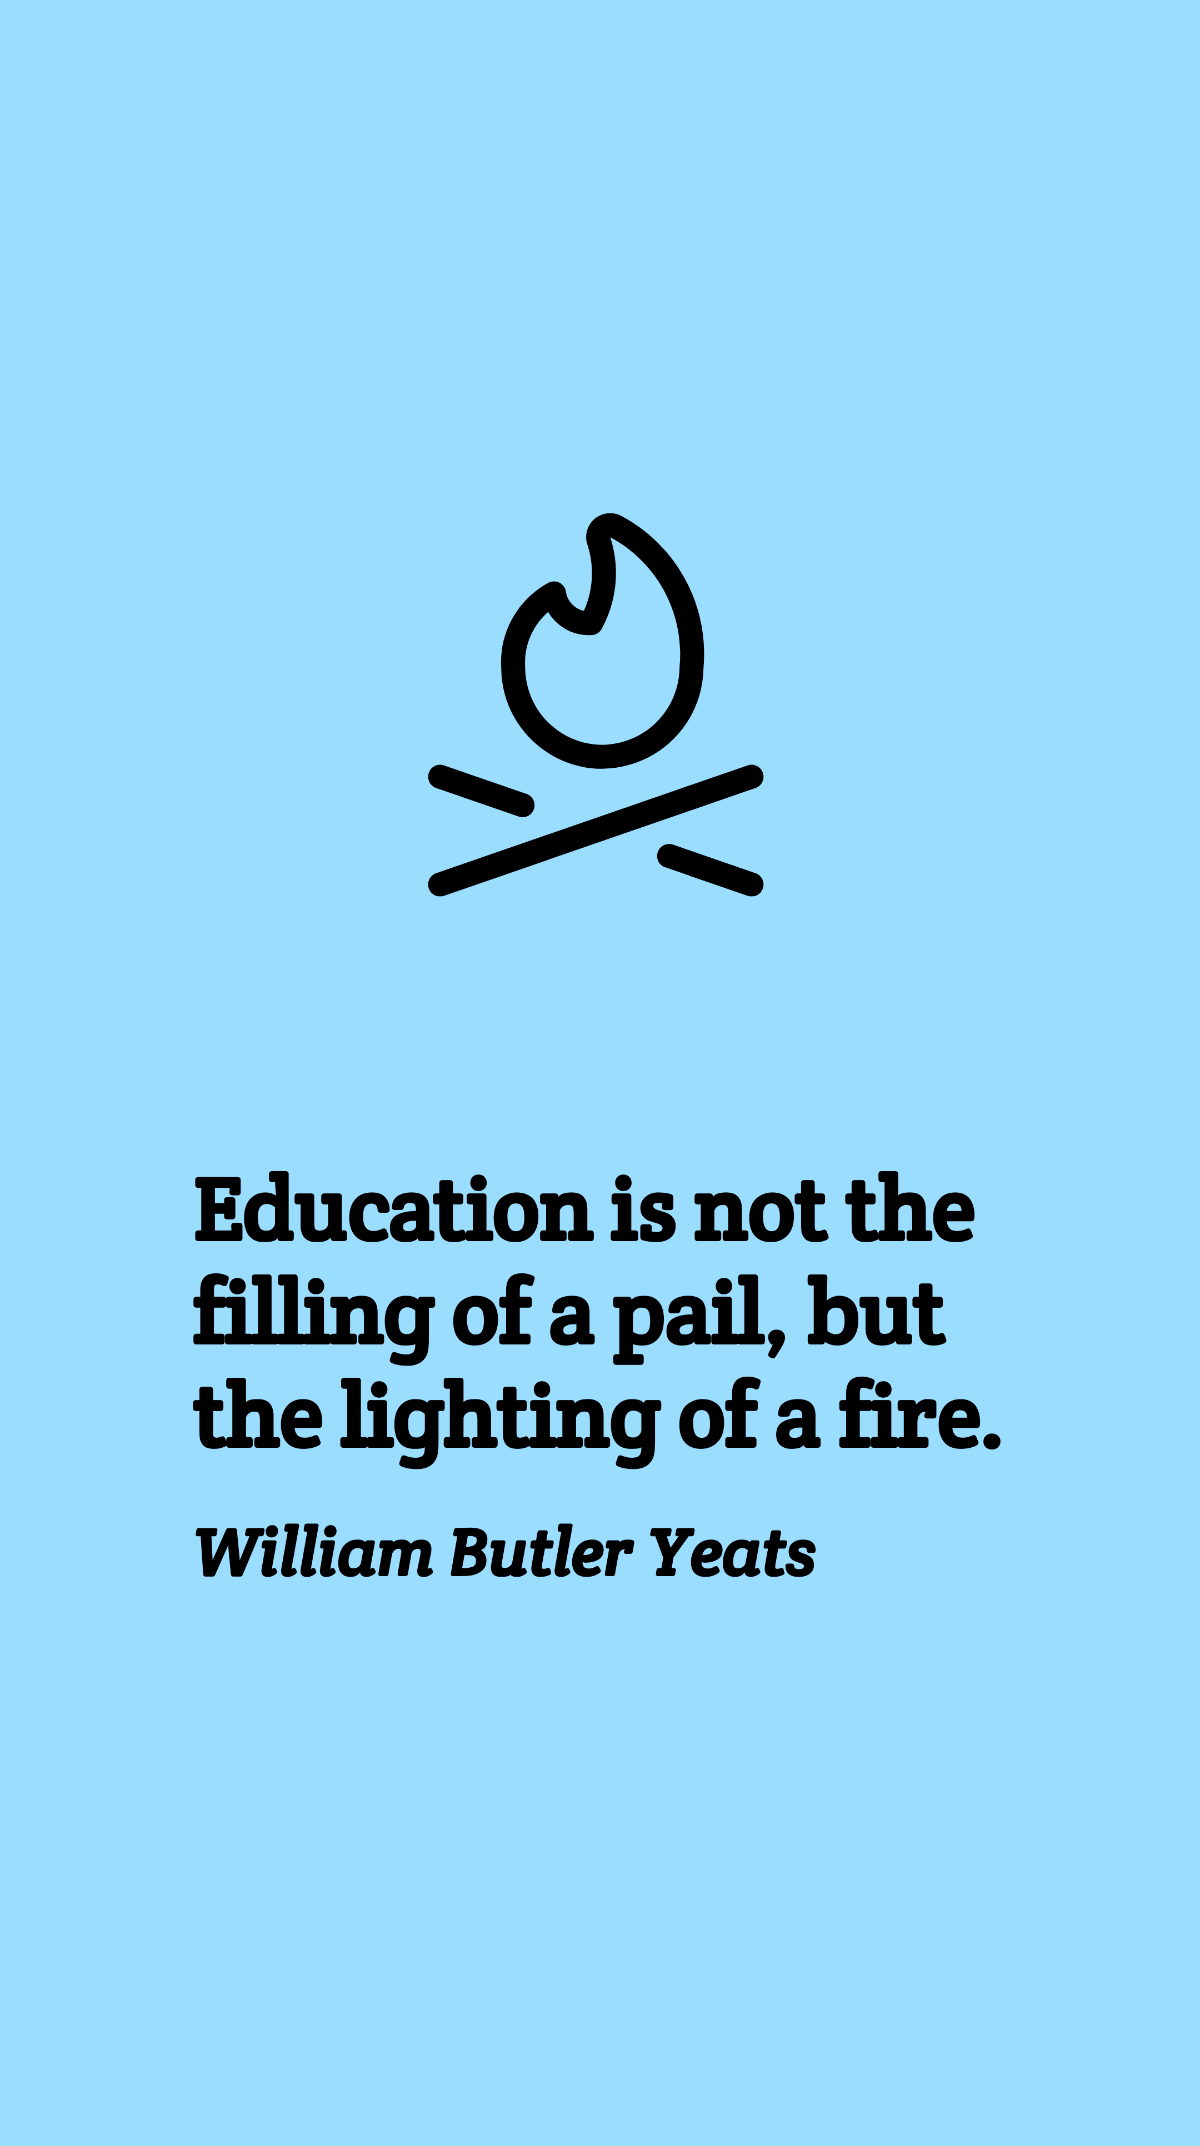 Free William Butler Yeats - Education is not the filling of a pail, but the lighting of a fire. Template